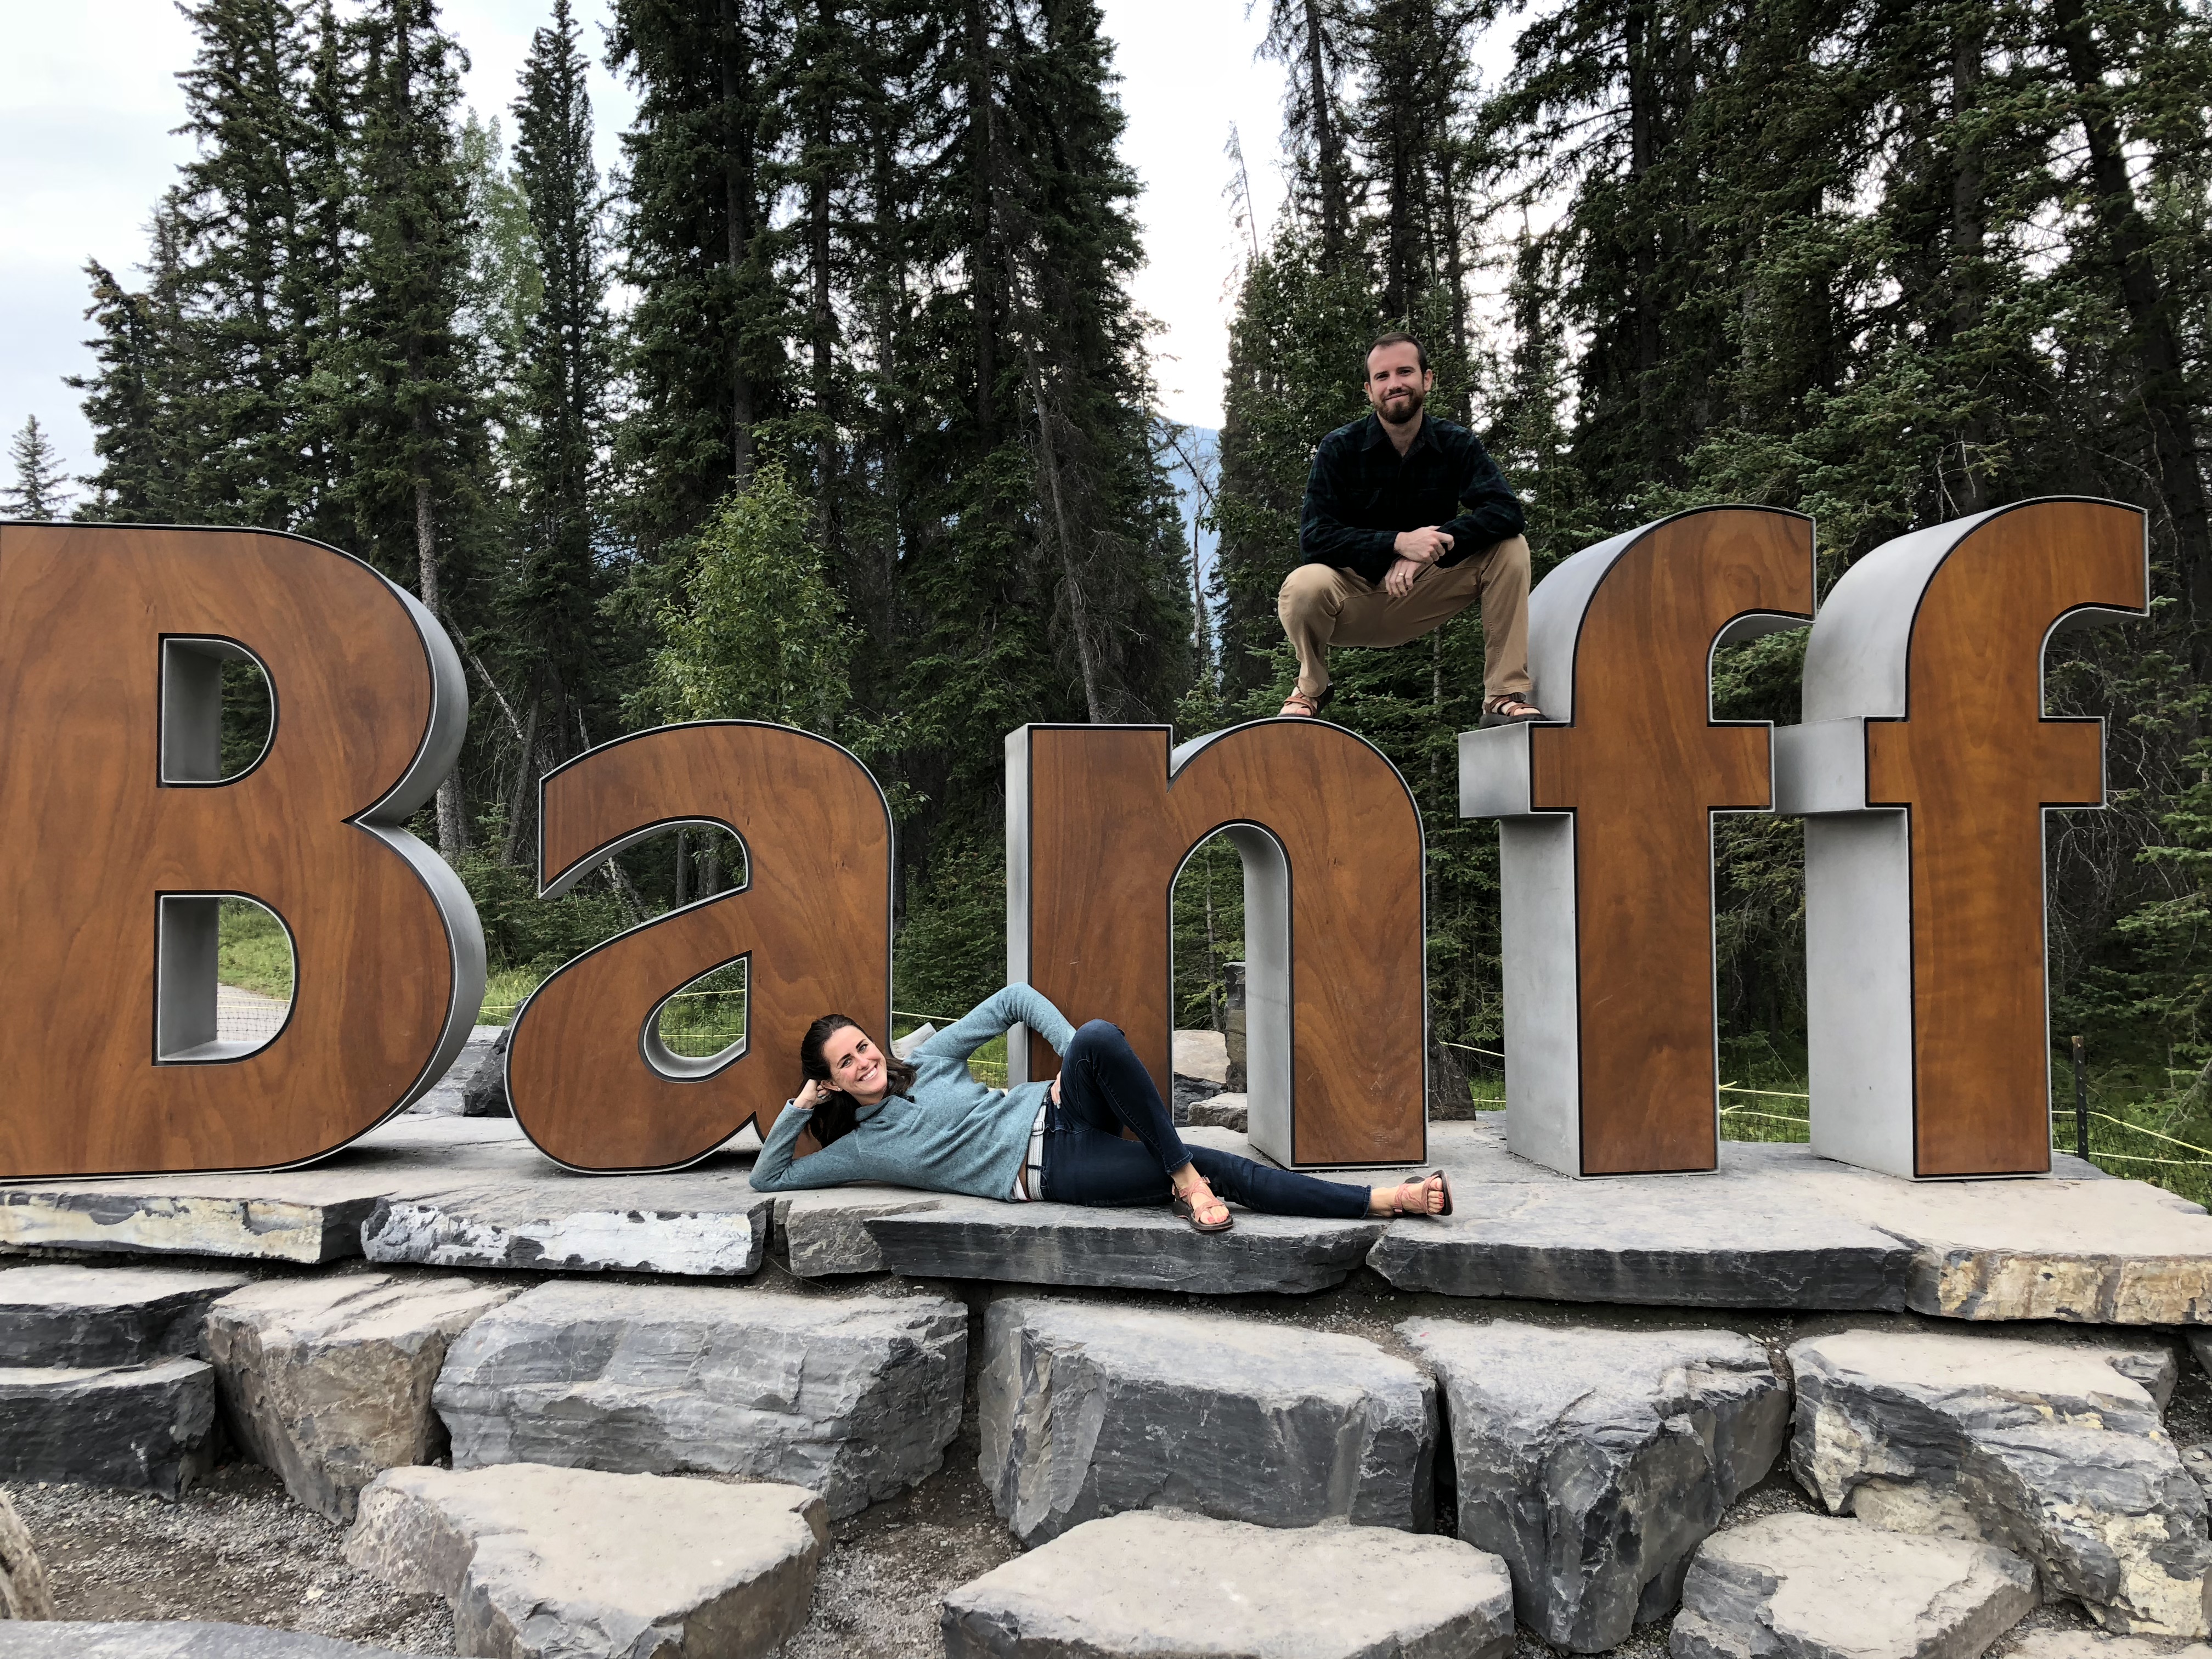 Banff In Two Days